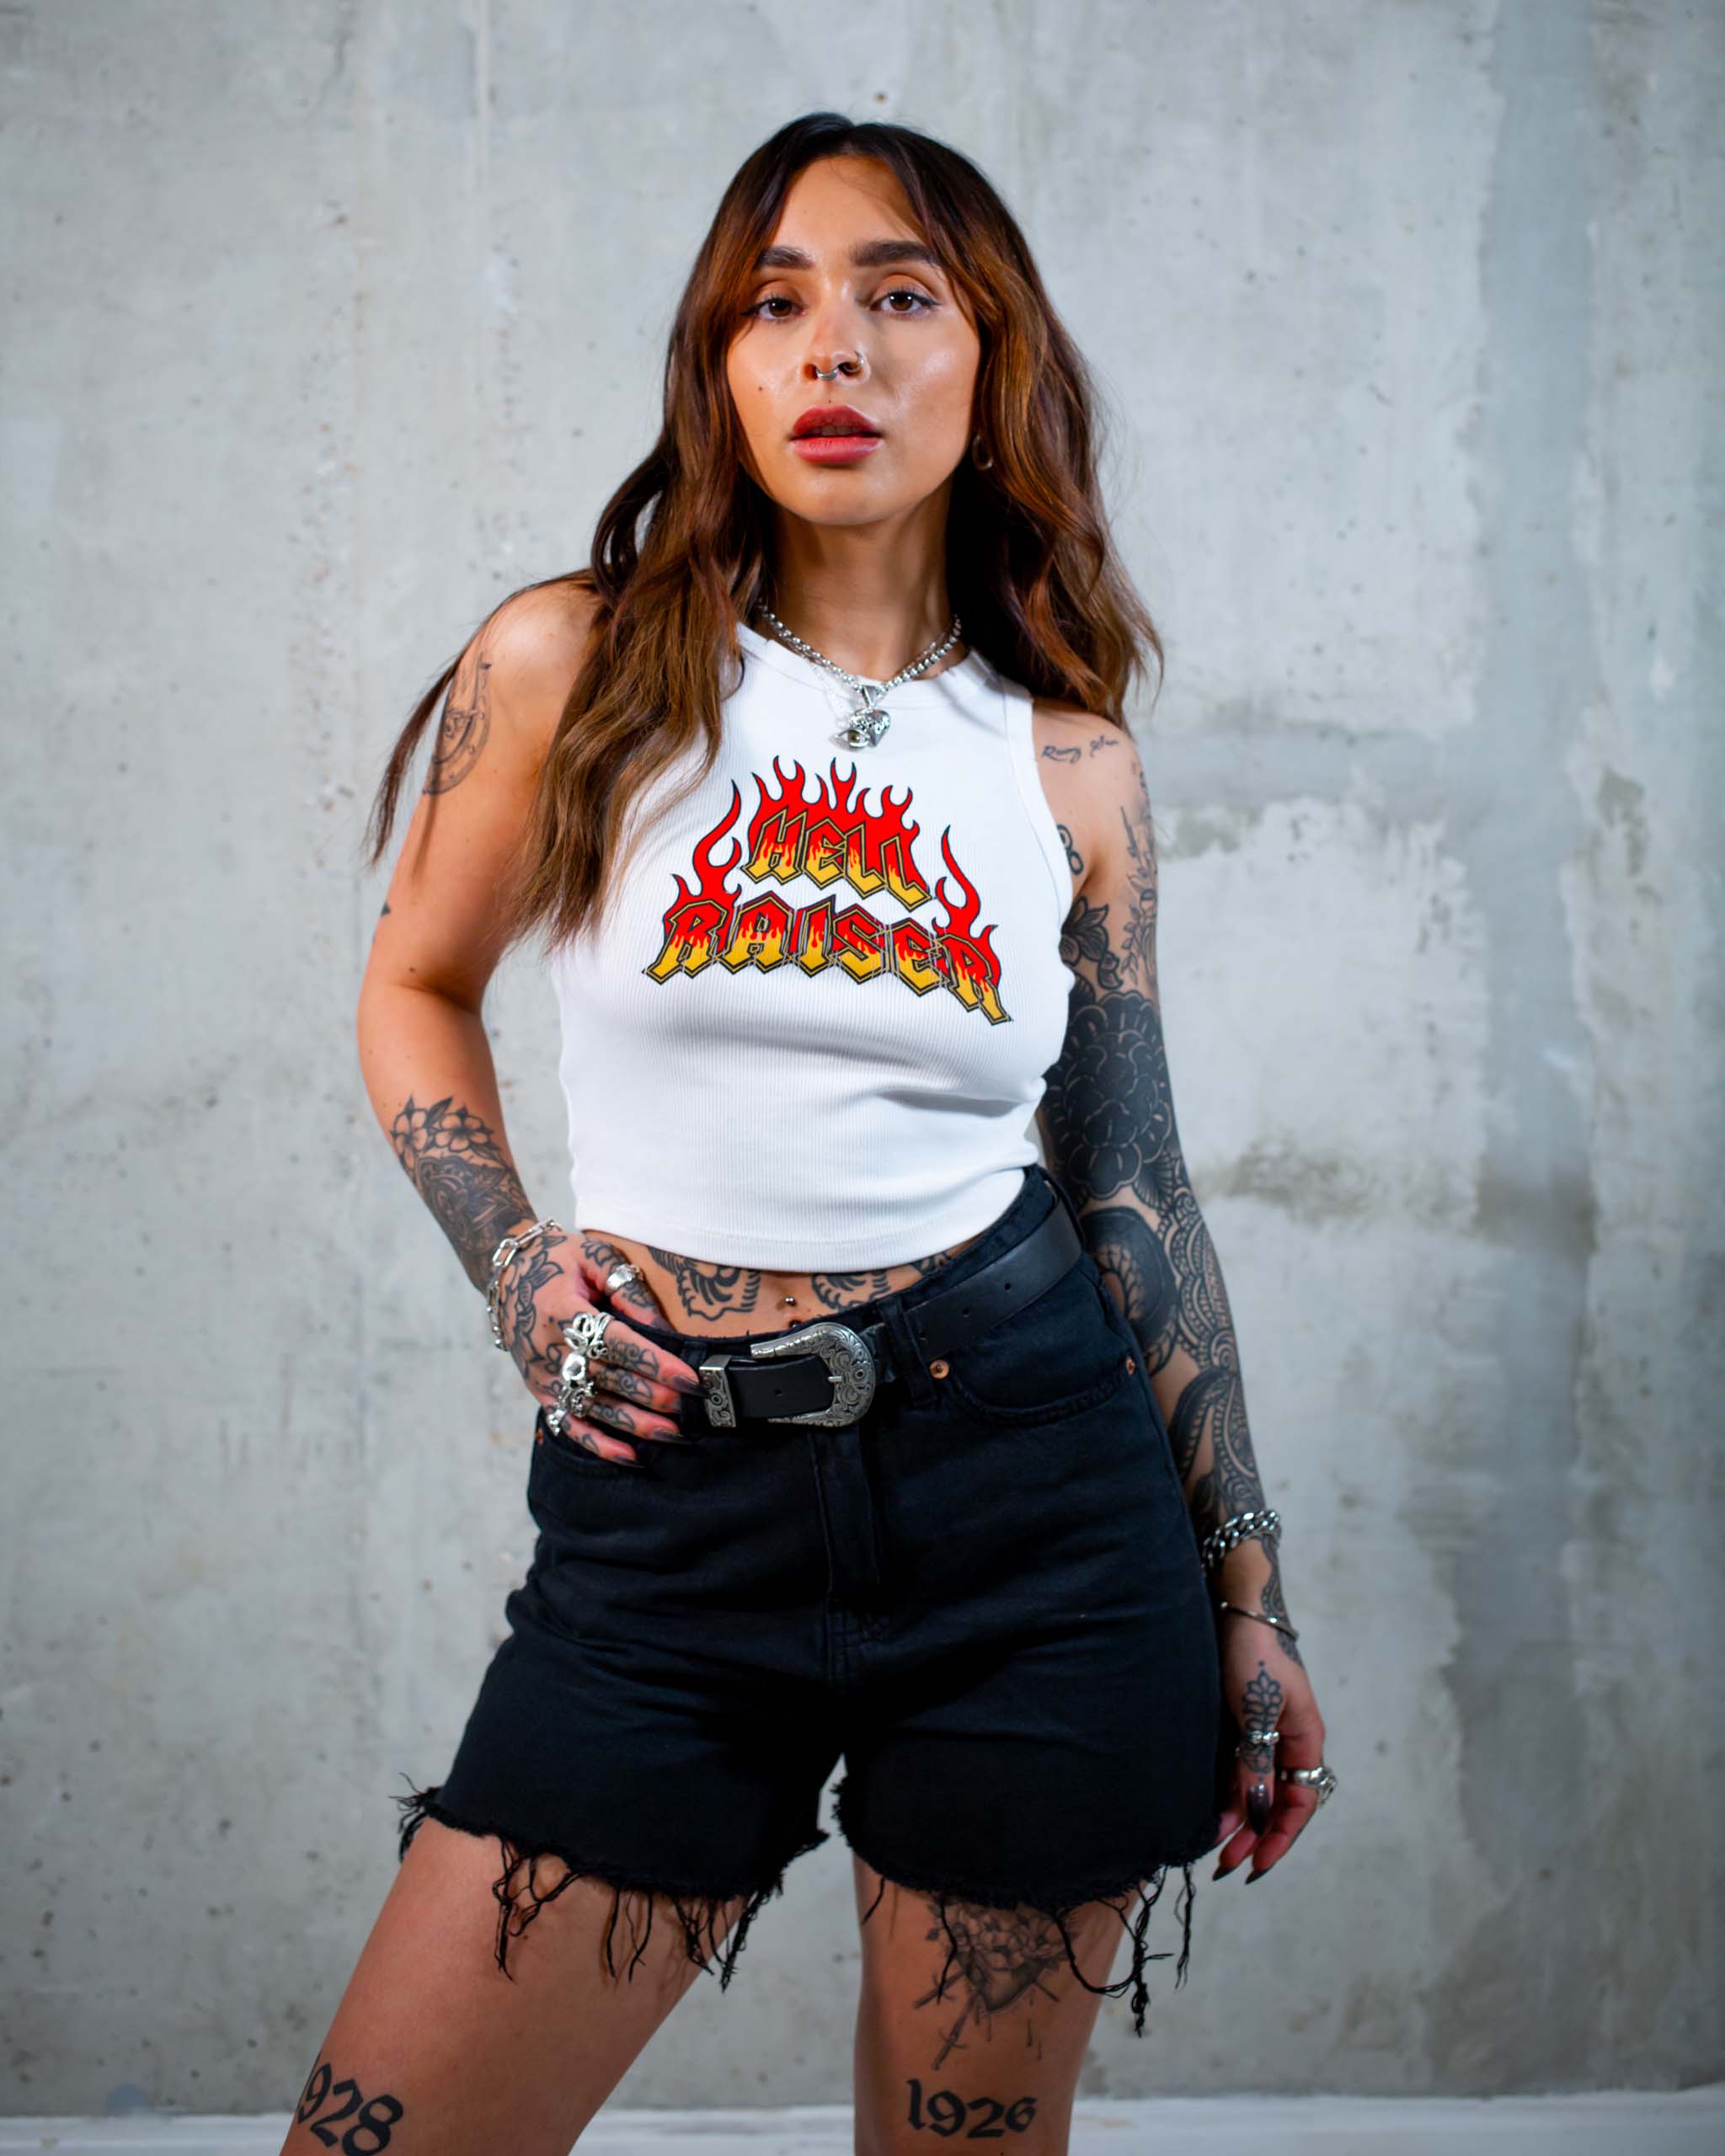 The Hell Raiser biker tank top by Sleazy Rider, featuring a flaming text graphic